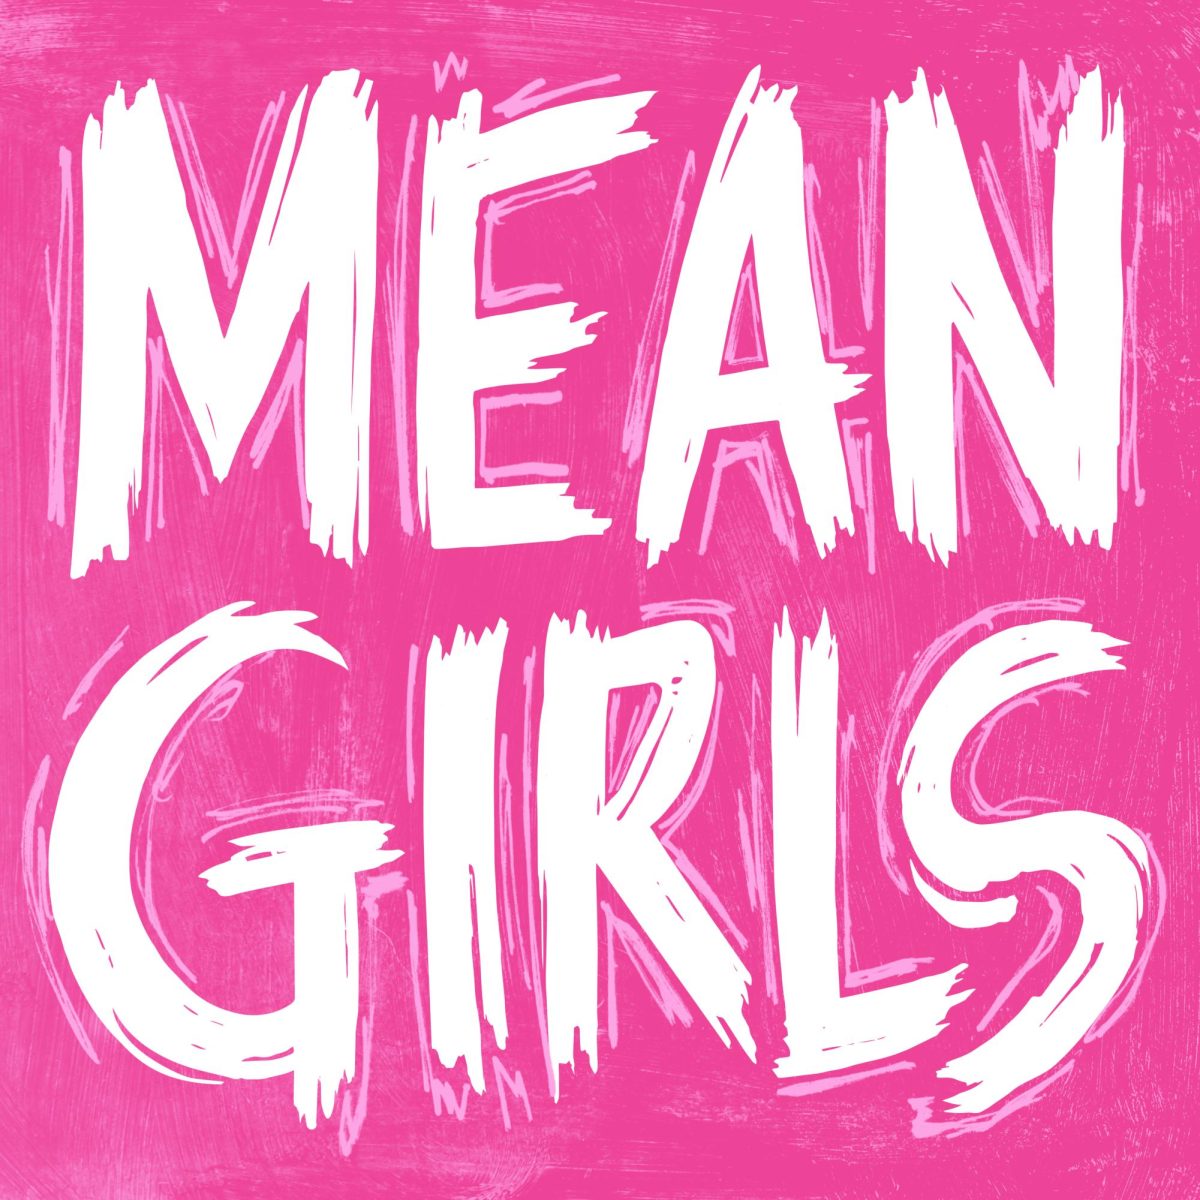 Mean Girls on Broadway: A modern, musical take on a 2000’s classic